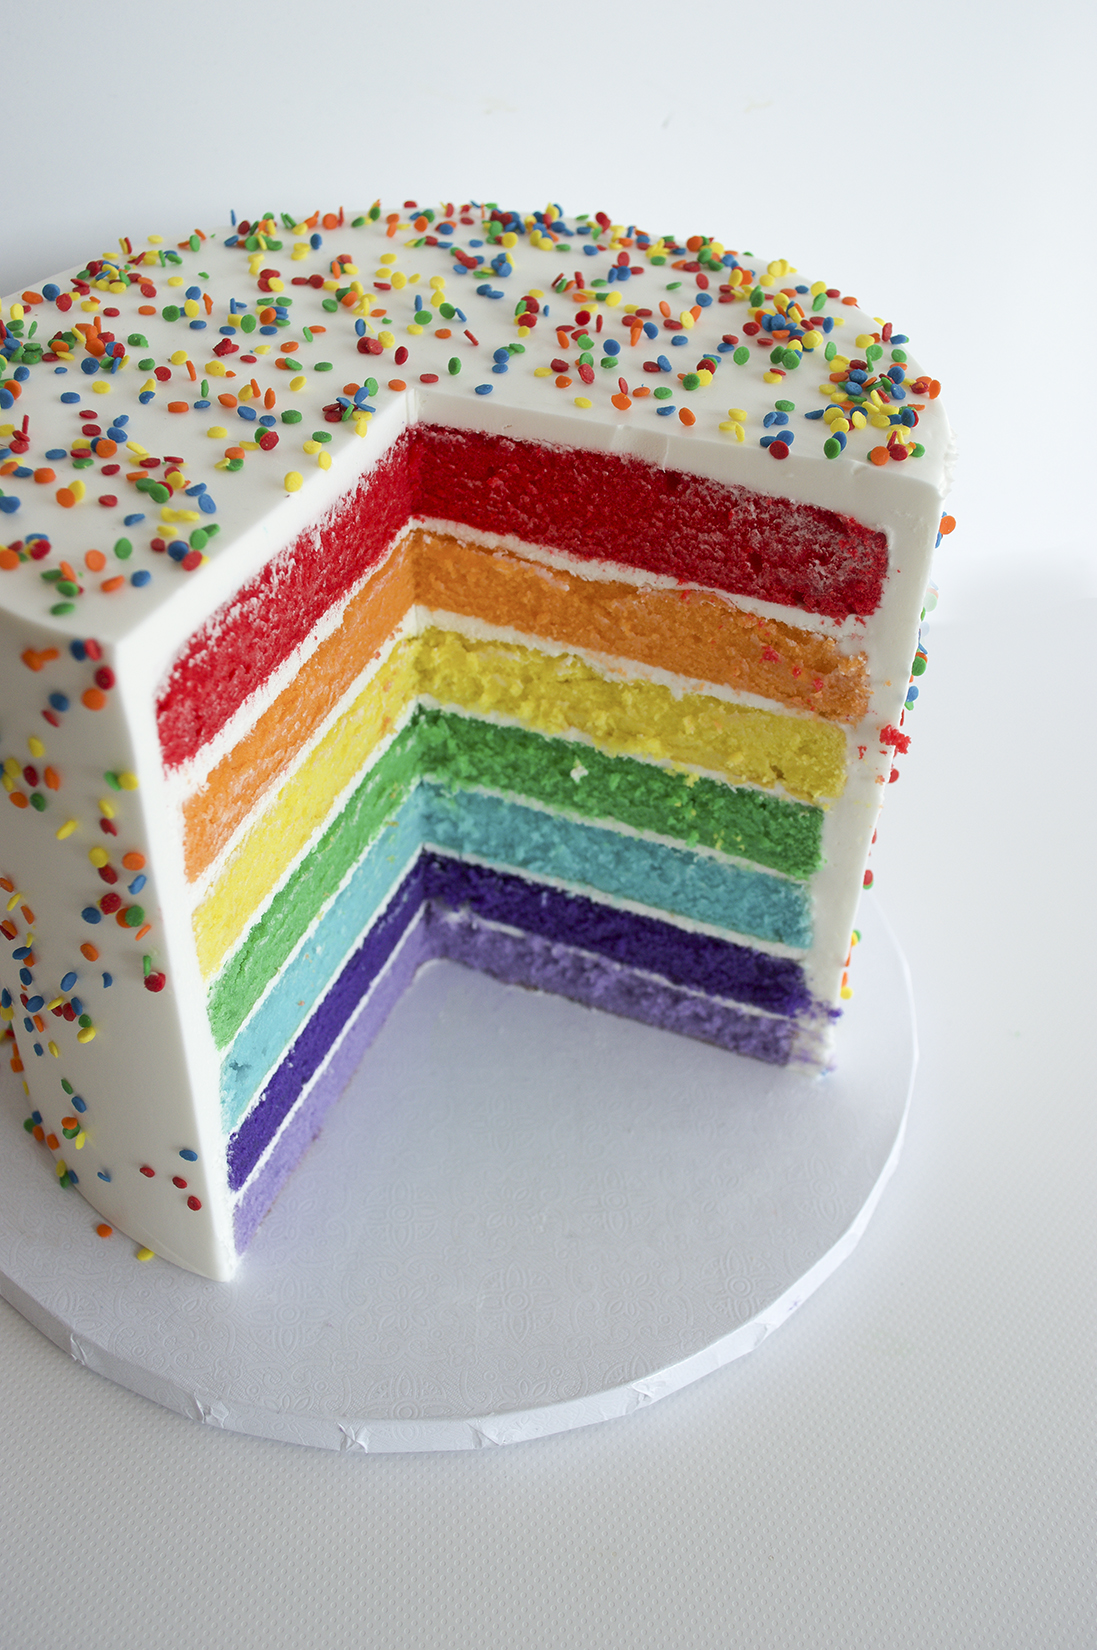 Three Brothers Bakery Celebrates Lgbt Pride With Colorful 7 Layer Cake